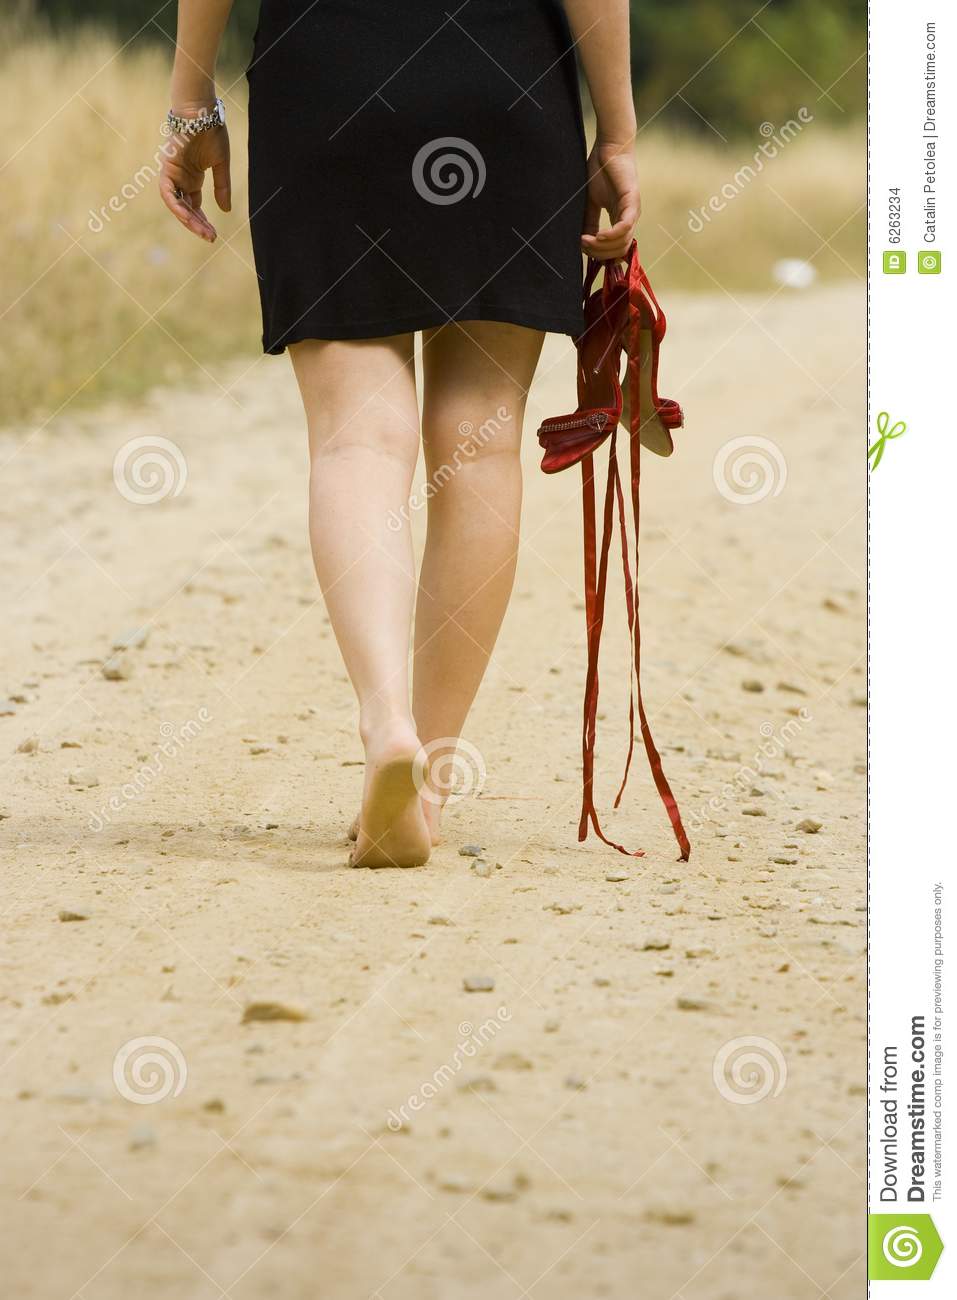 Portrait Of A Barefoot Woman Holding Her Red Sandals 